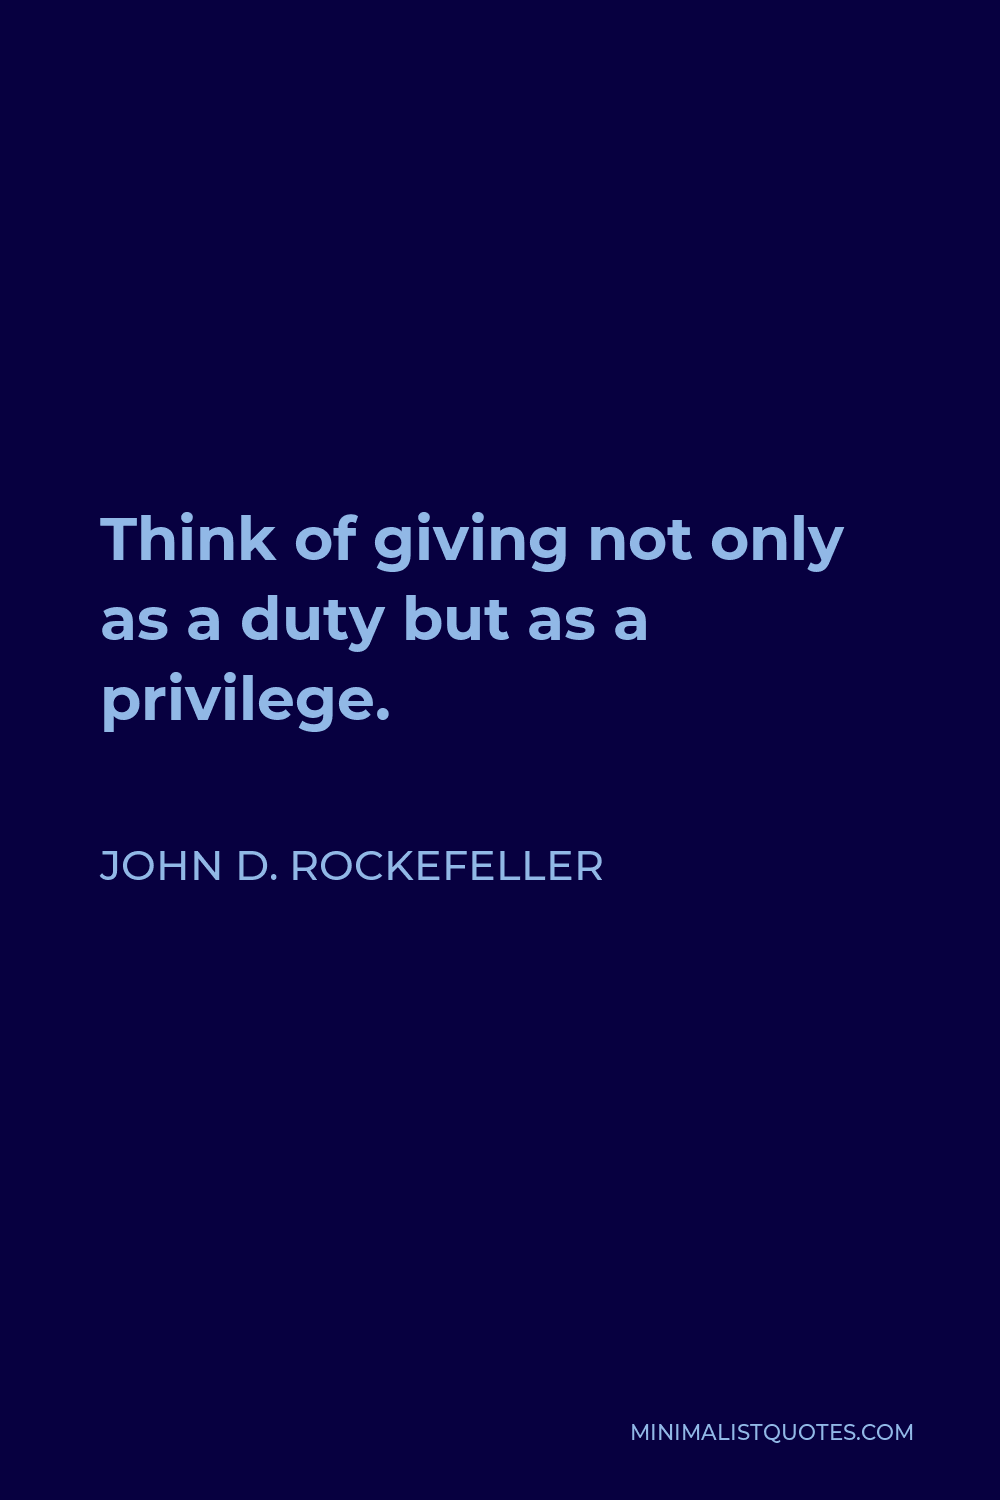 John D. Rockefeller Quote - Think of giving not only as a duty but as a privilege.